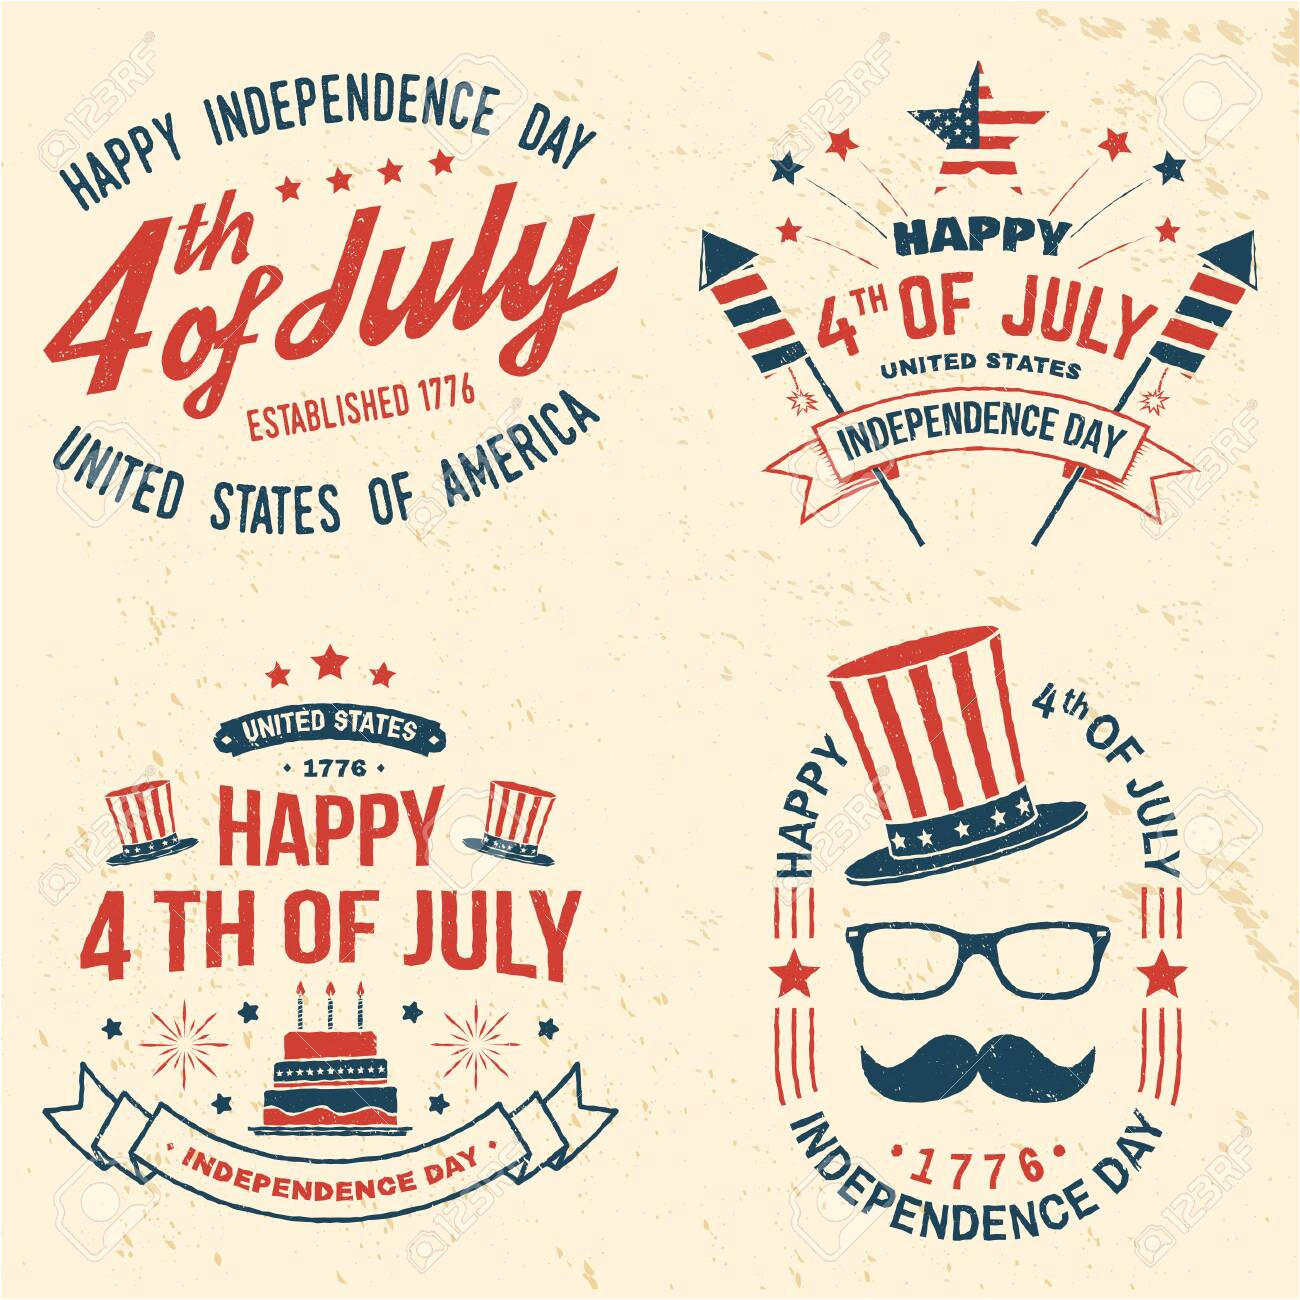 127113118 set of vintage 4th of july design fourth of july felicitation classic postcard independence day gree jpg